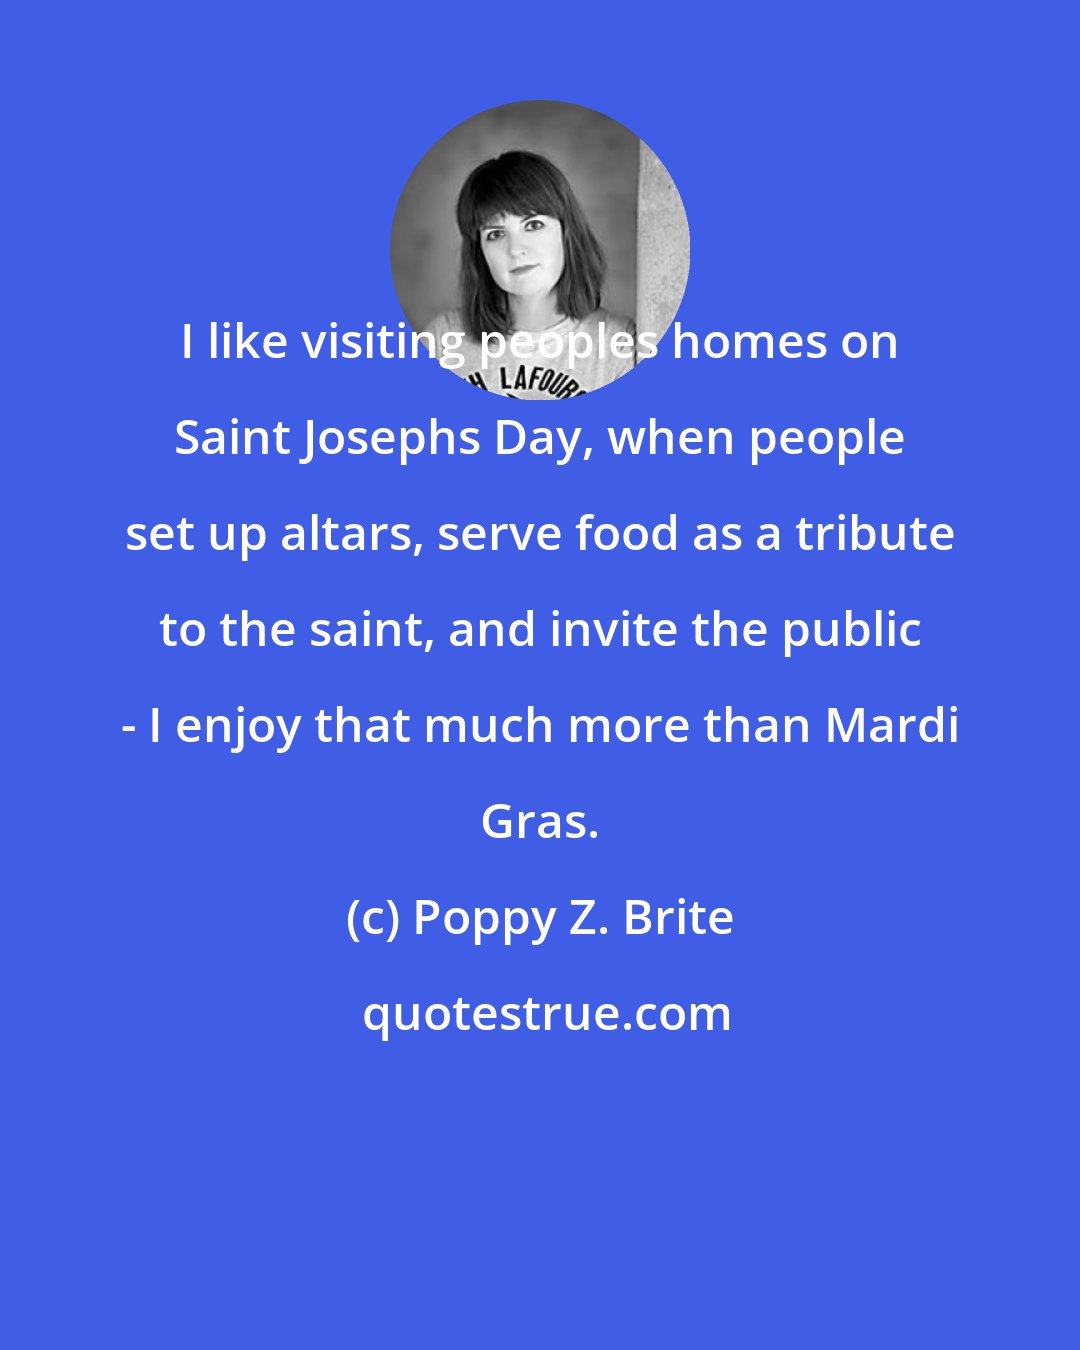 Poppy Z. Brite: I like visiting peoples homes on Saint Josephs Day, when people set up altars, serve food as a tribute to the saint, and invite the public - I enjoy that much more than Mardi Gras.